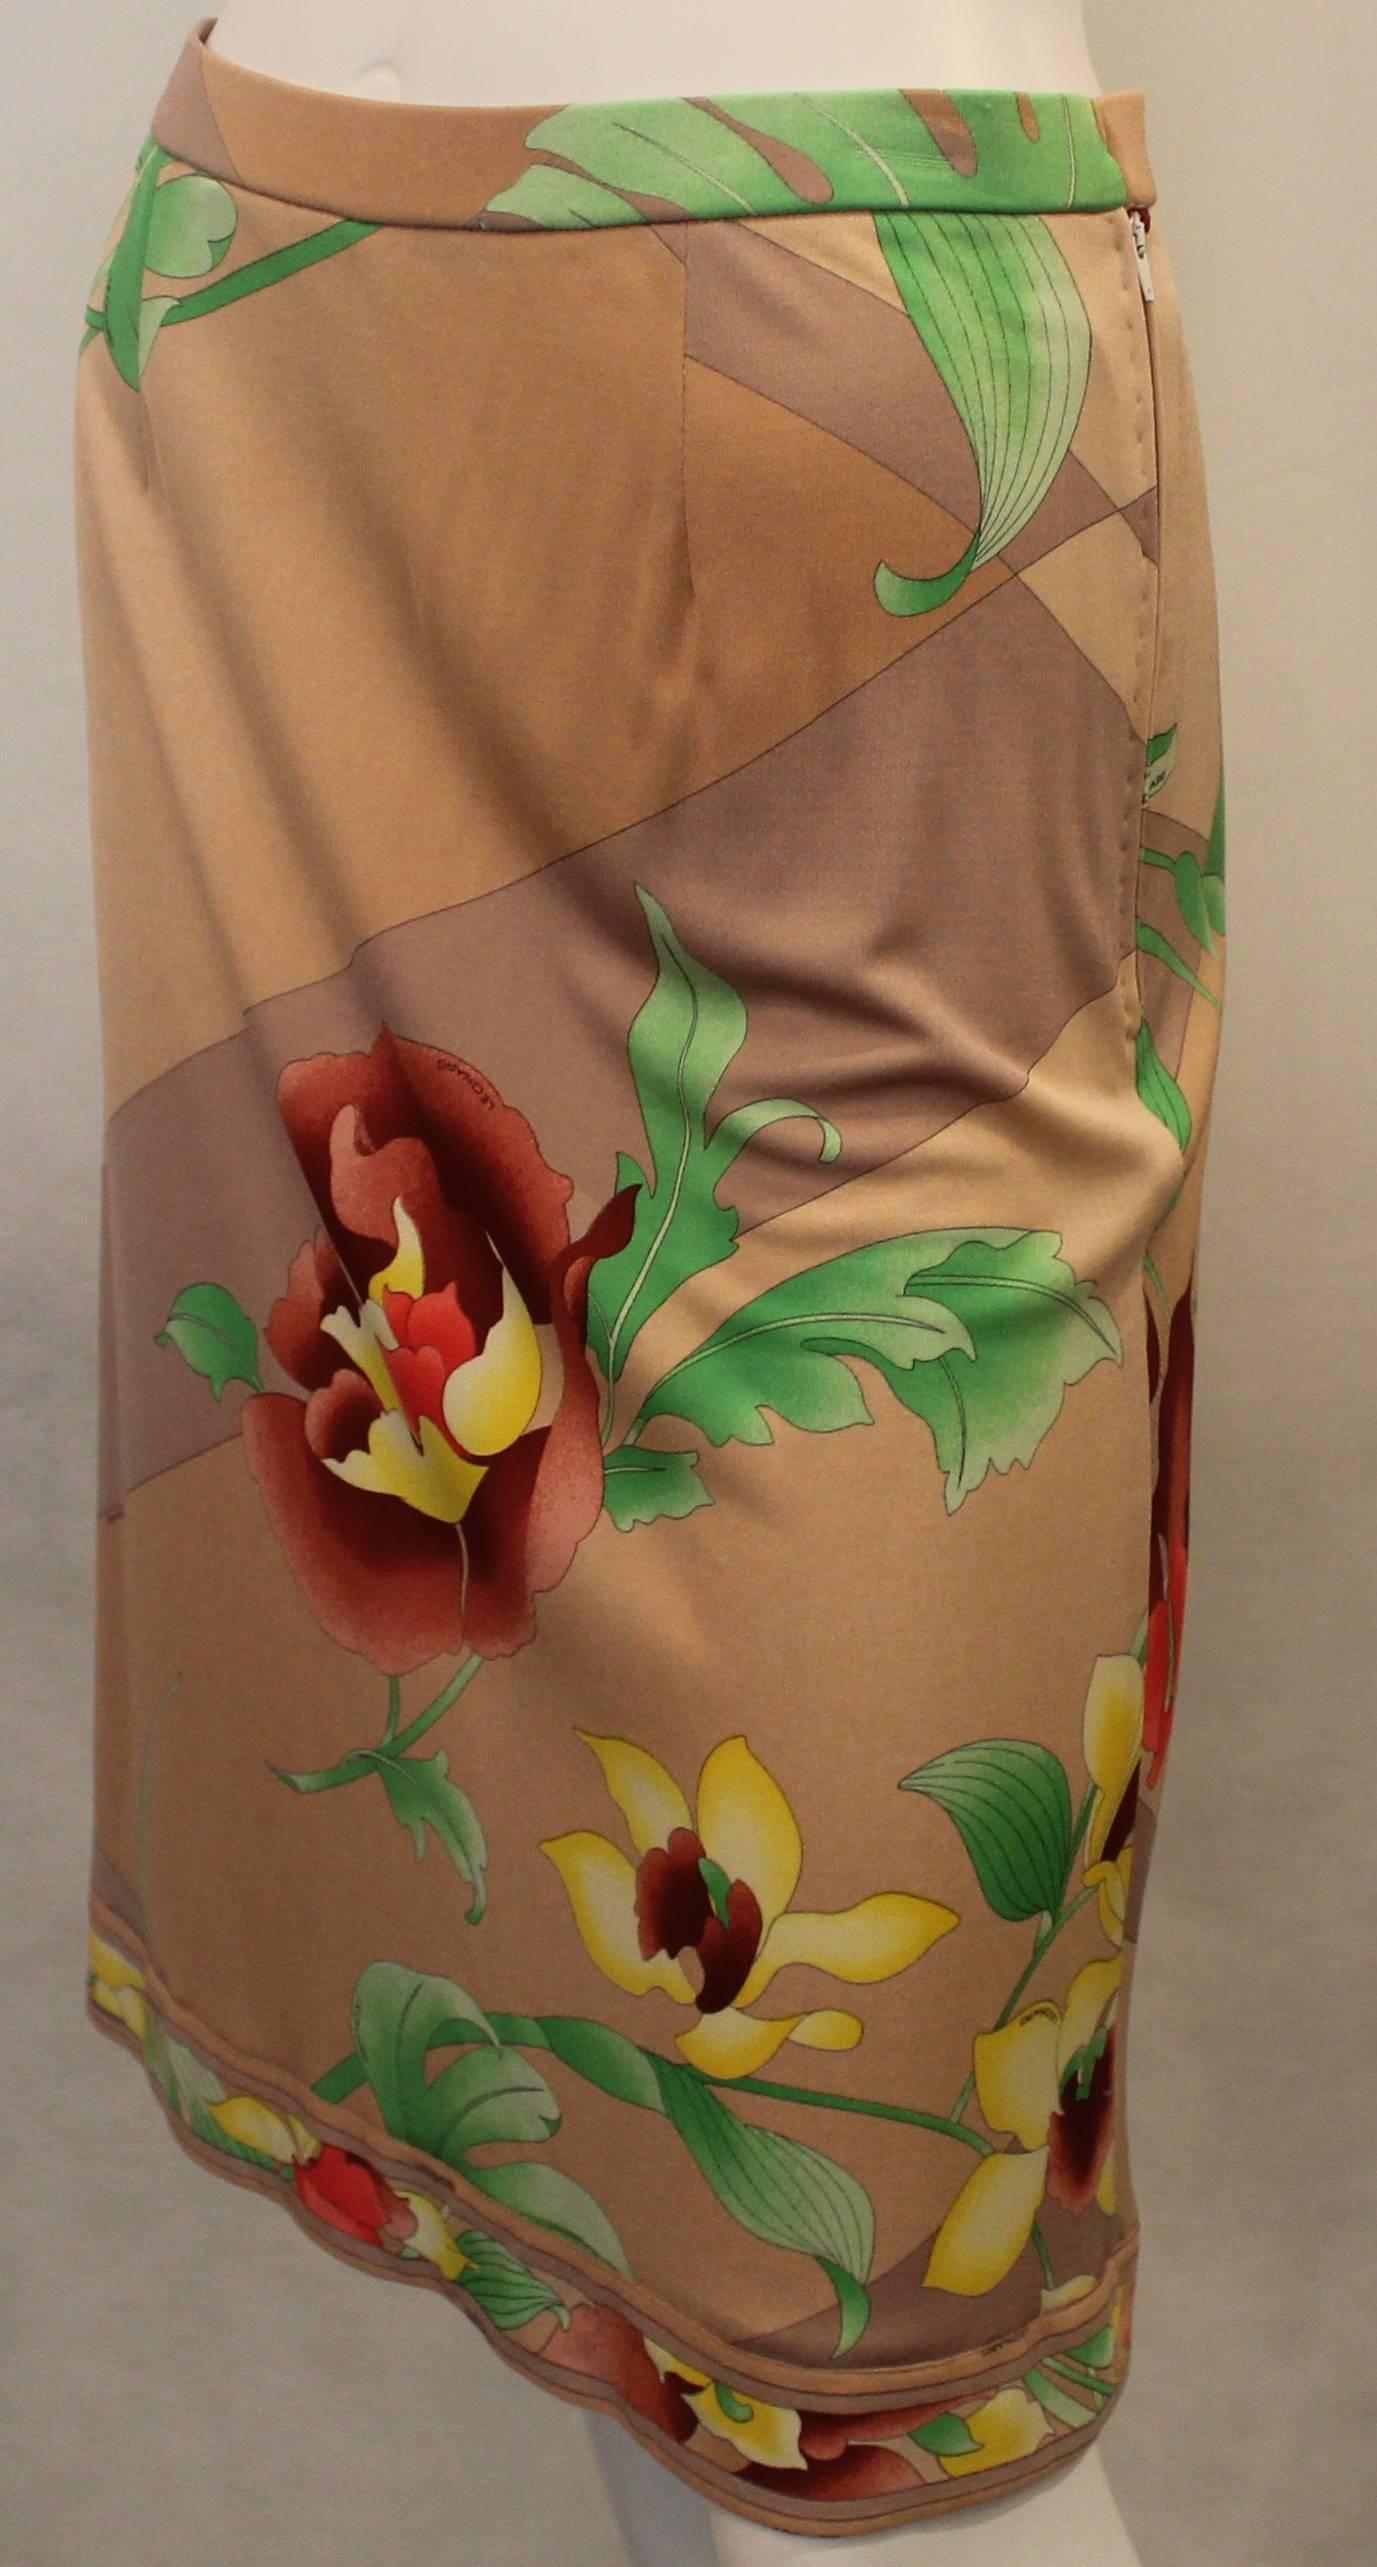 Leonard Tan Silk Jersey Skirt with Large Floral Print - 38. This skirt is in good condition with small pulls throughout and wear being consistent with age. The skirt features a waist band, side zipper, and printed trim on the